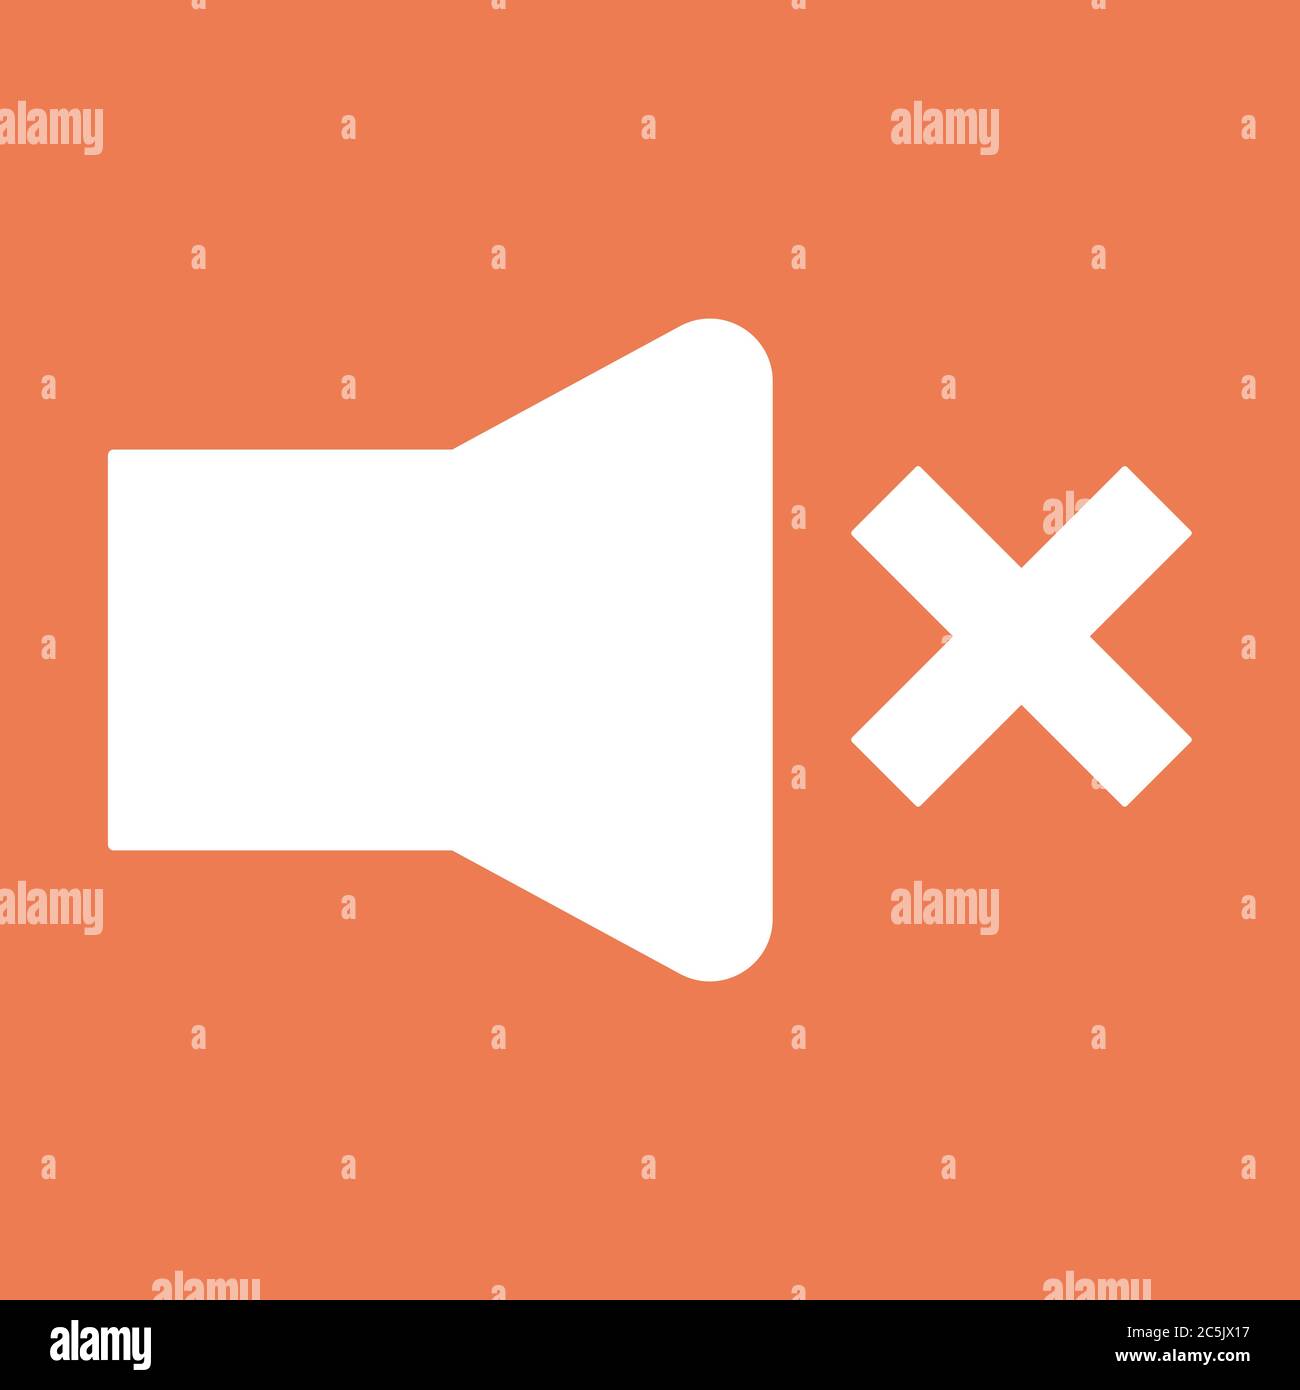 Mute sound icon. For websites and apps. Image on red background. Flat line vector illustration. Stock Vector